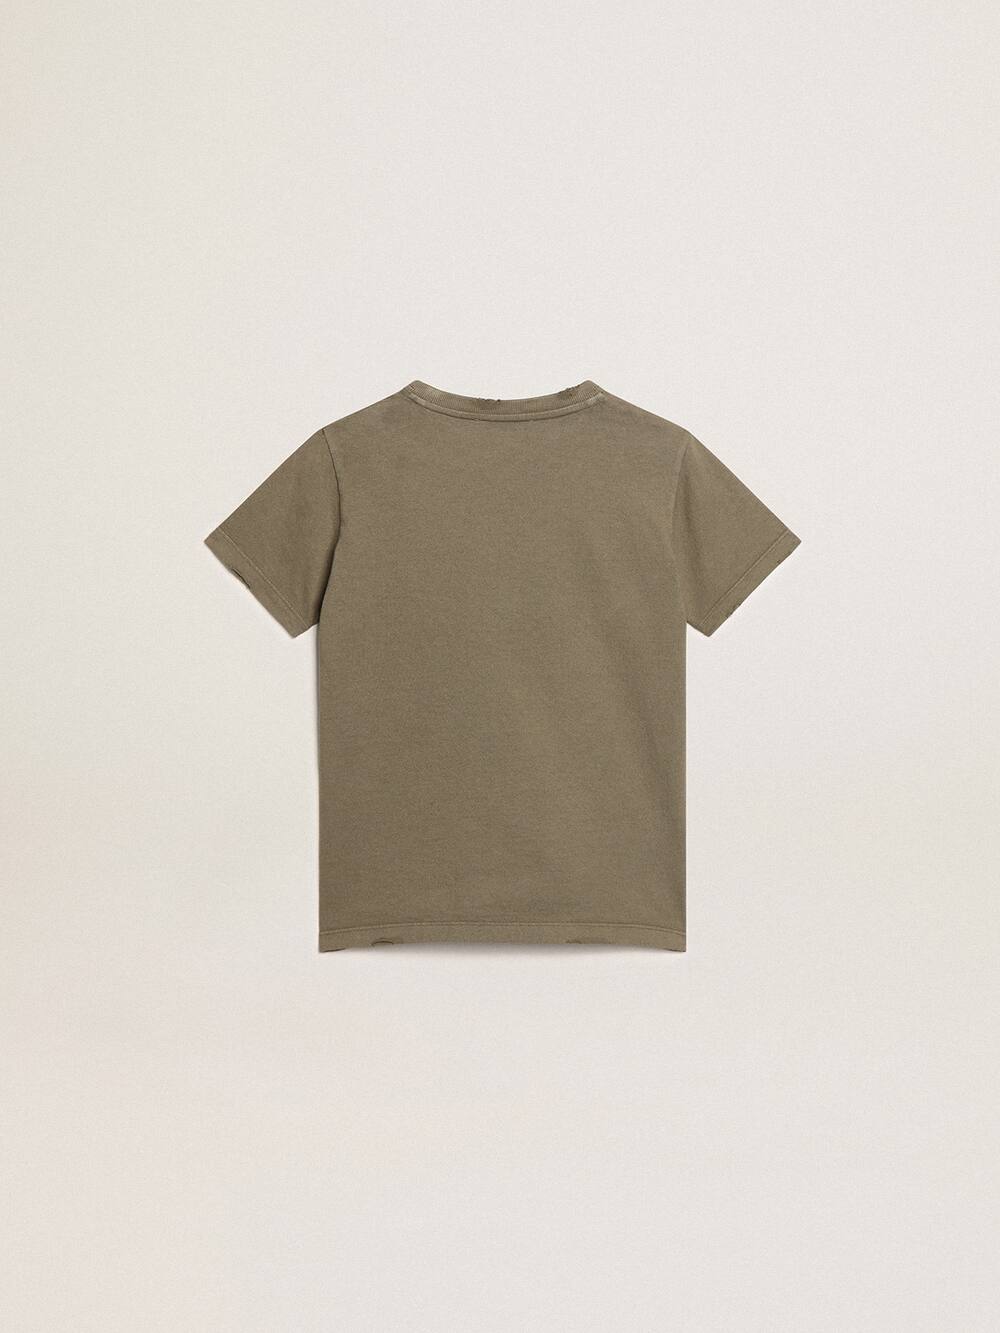 Golden Goose - Boys’ olive-green T-shirt with printed white logo in the center in 